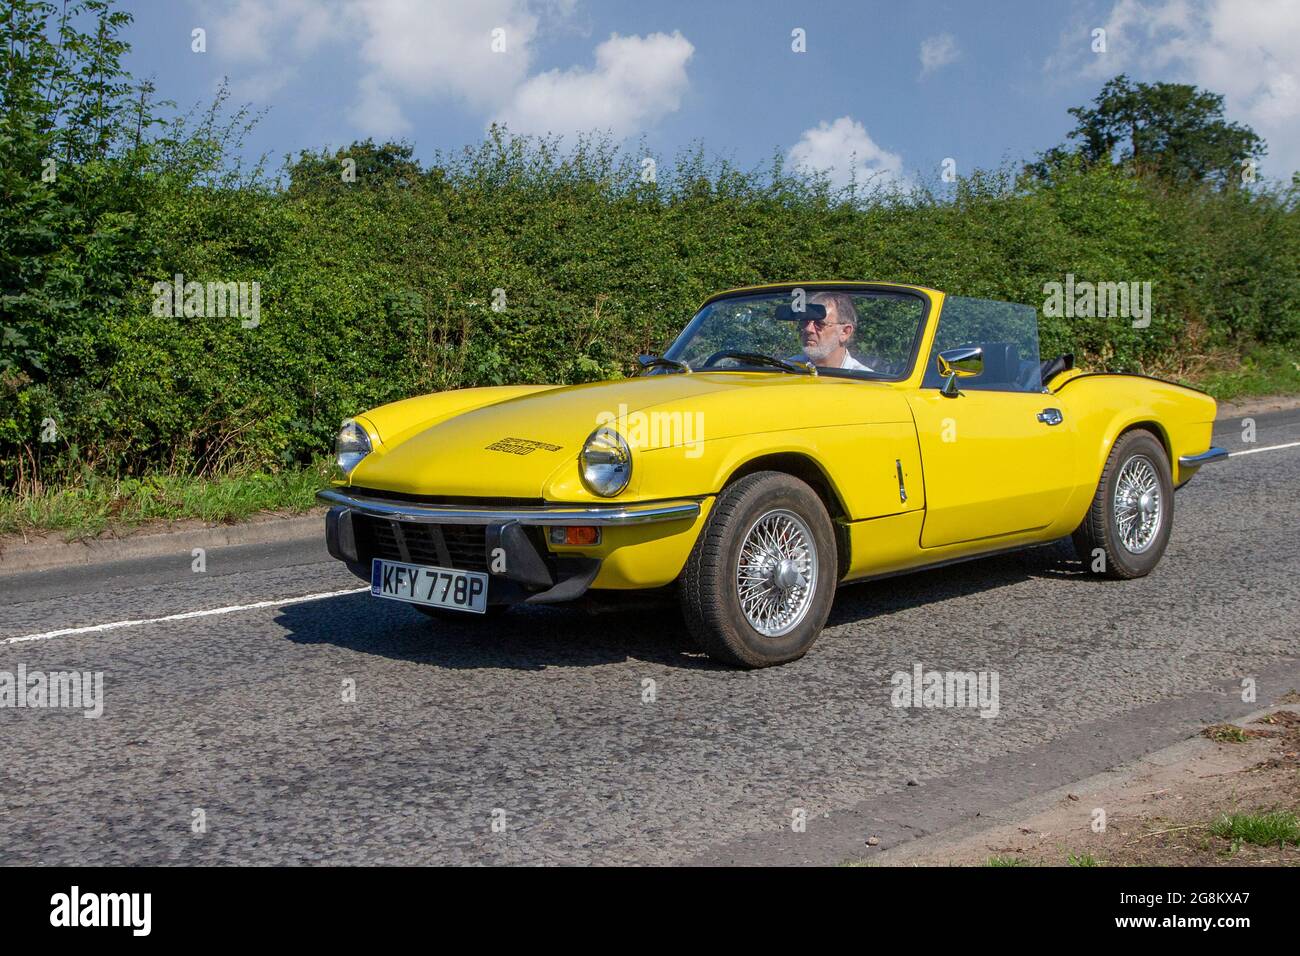 1976 70s yellow British Triumph Spitfire sports car cabrio, British front-engined, rear-wheel drive, two-passenger convertible, en-route to Capesthorne Hall classic July car show, Cheshire, UK Stock Photo